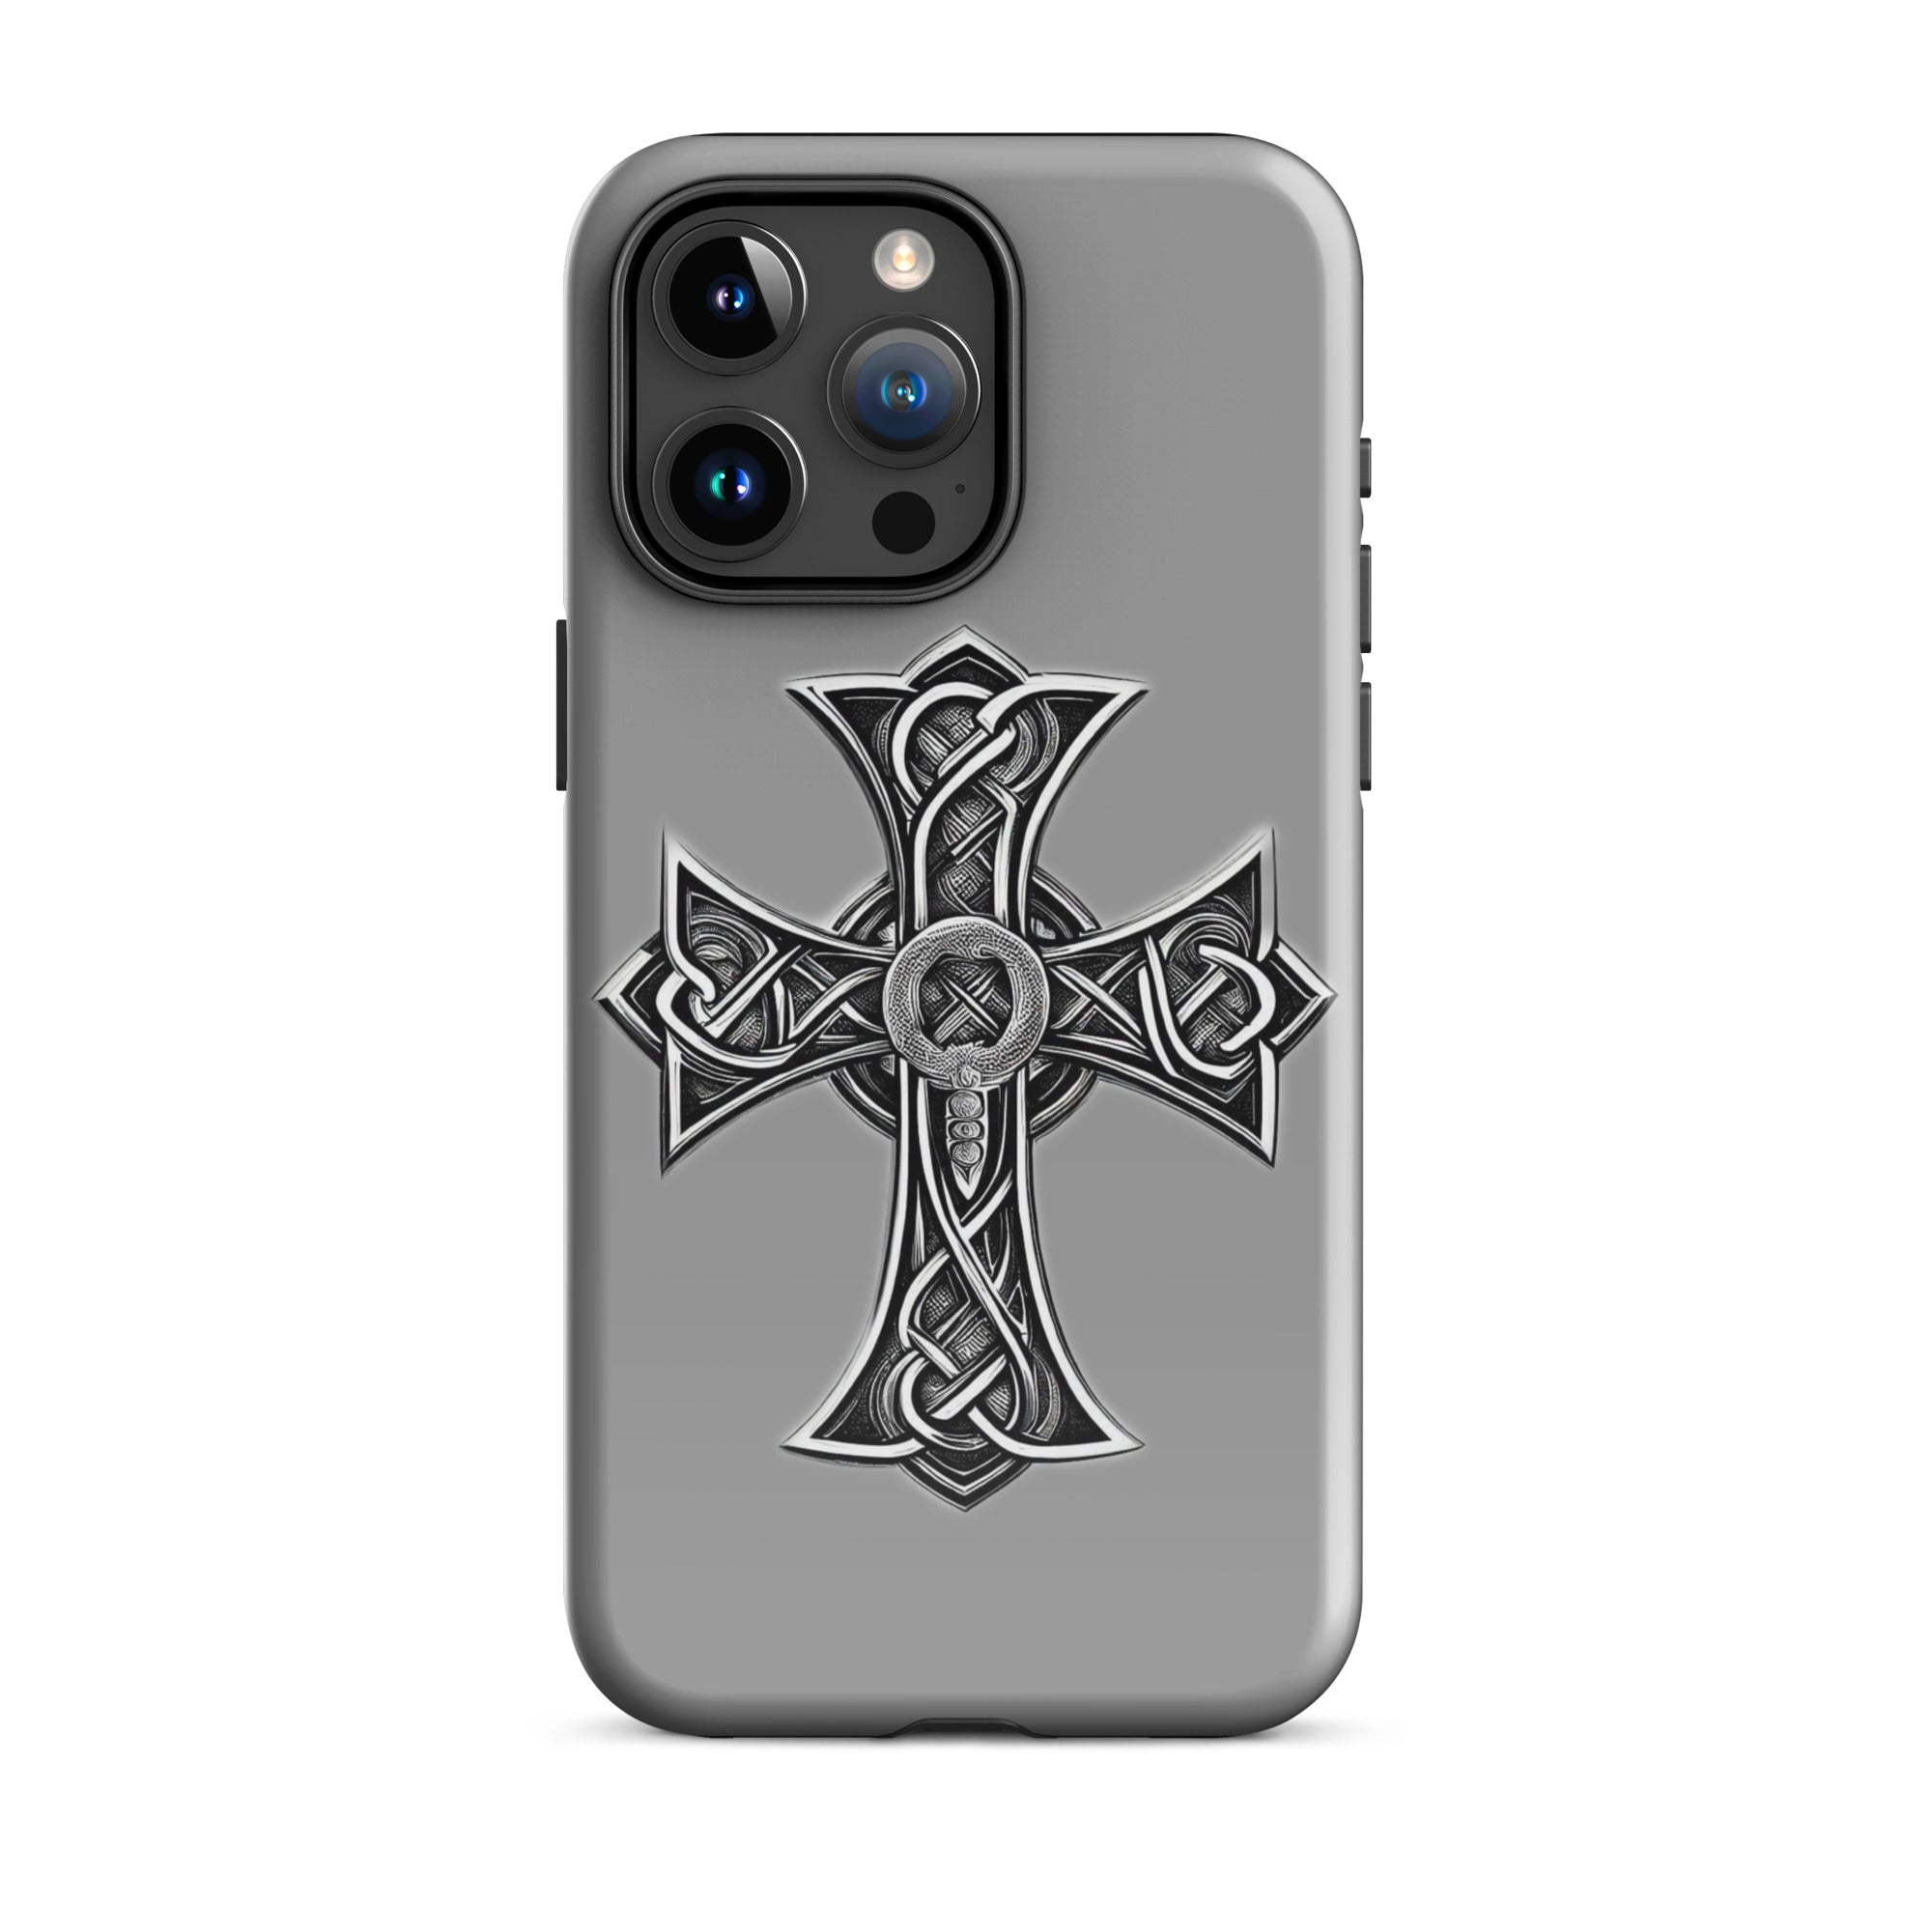 tough-case-for-iphone-glossy-iphone-15-pro-max-front-6563847713048.jpg